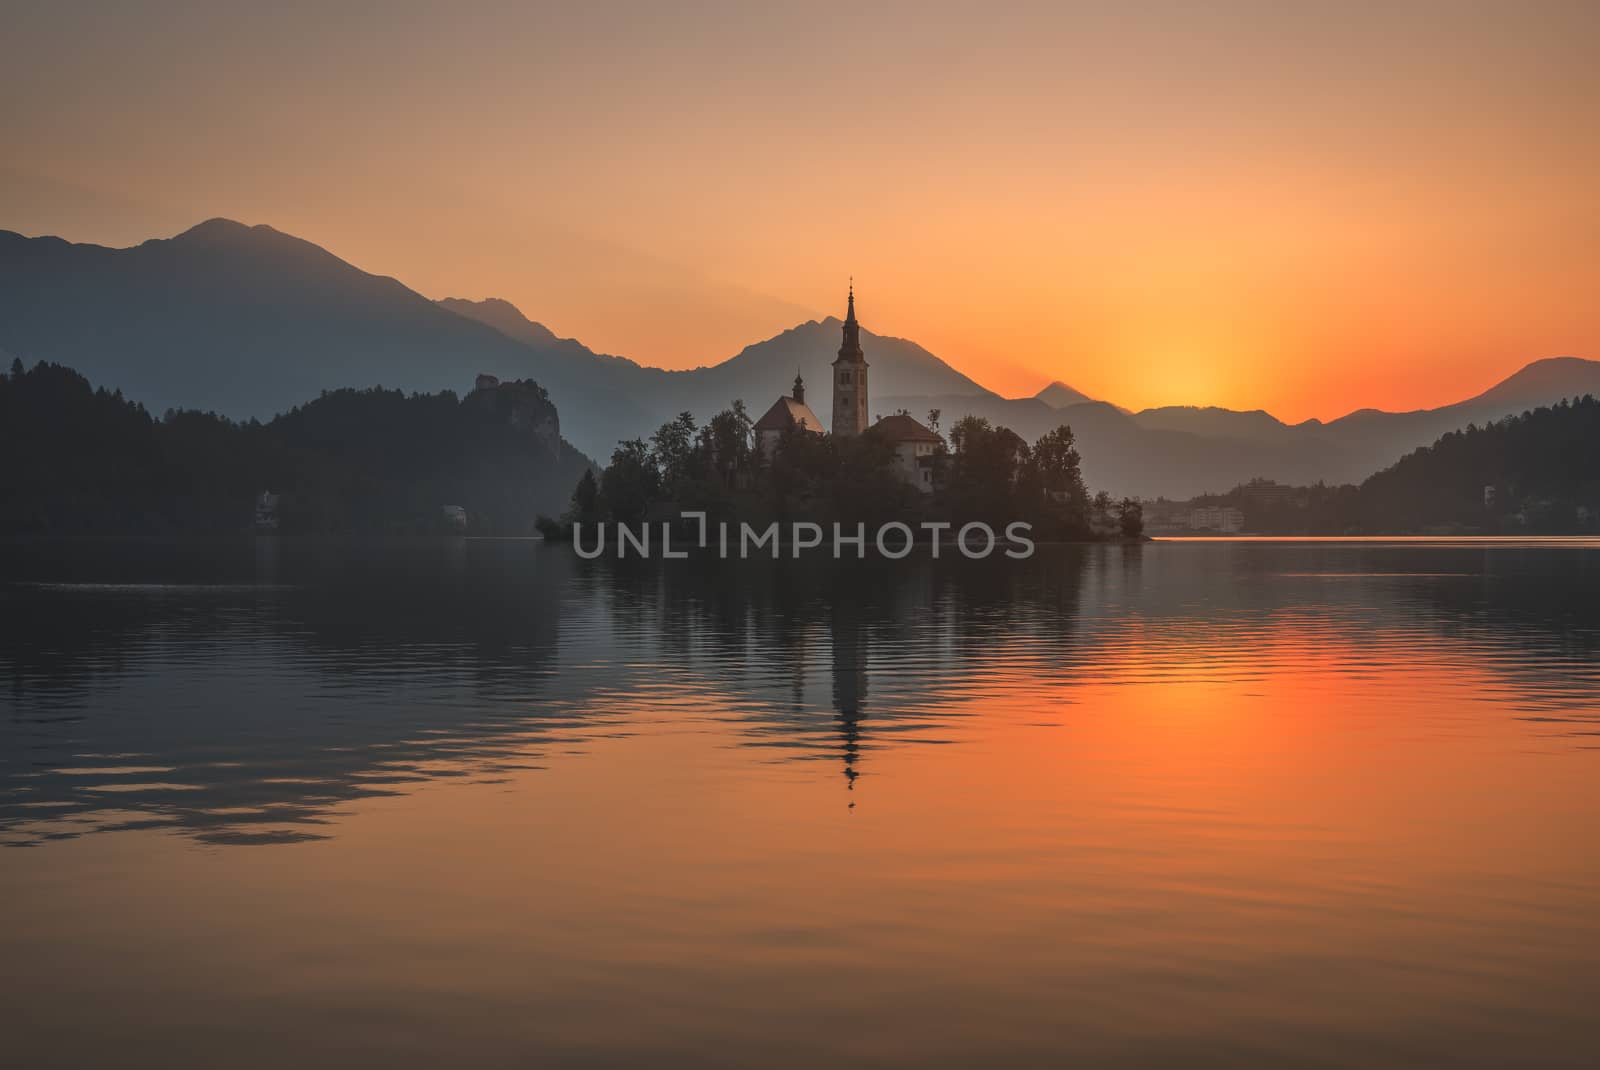 Little Island with Catholic Church in Bled Lake, Slovenia at Beautiful Colorful Sunrise with Castle and Mountains in Background